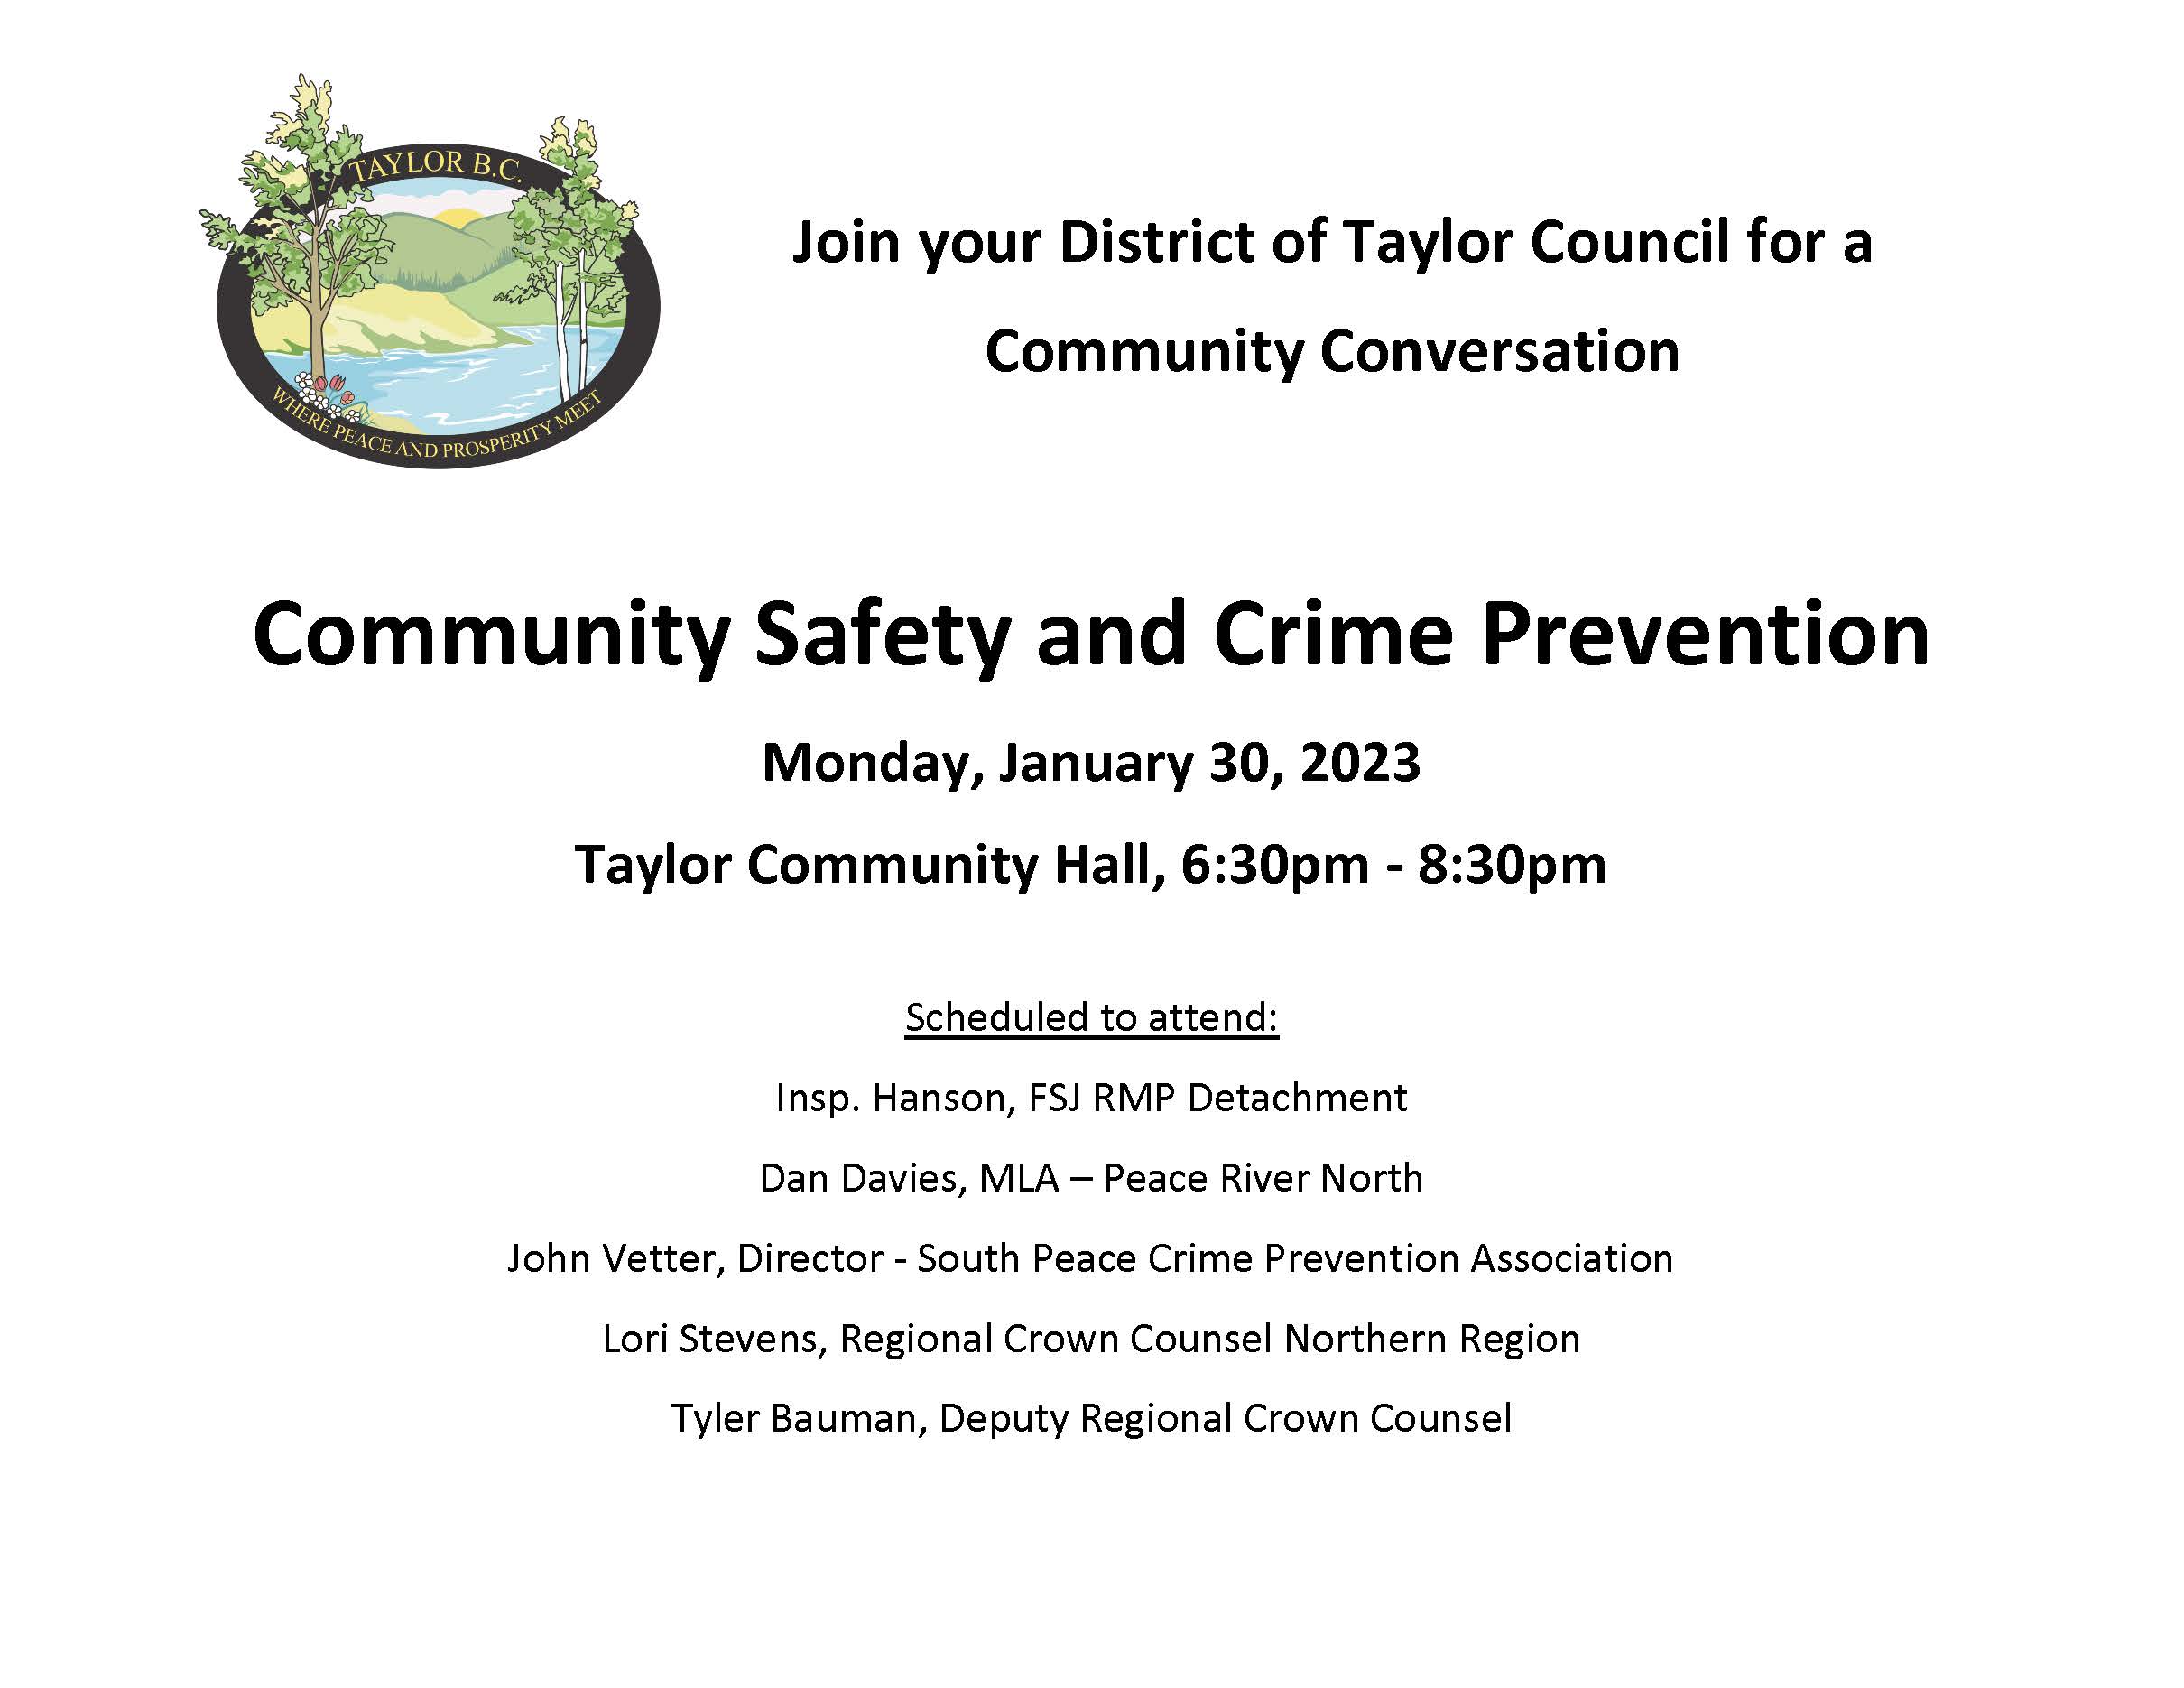 Join your District of Taylor Council and invited community partners for a Community Conversation about Community Safety and Crime Prevention #2